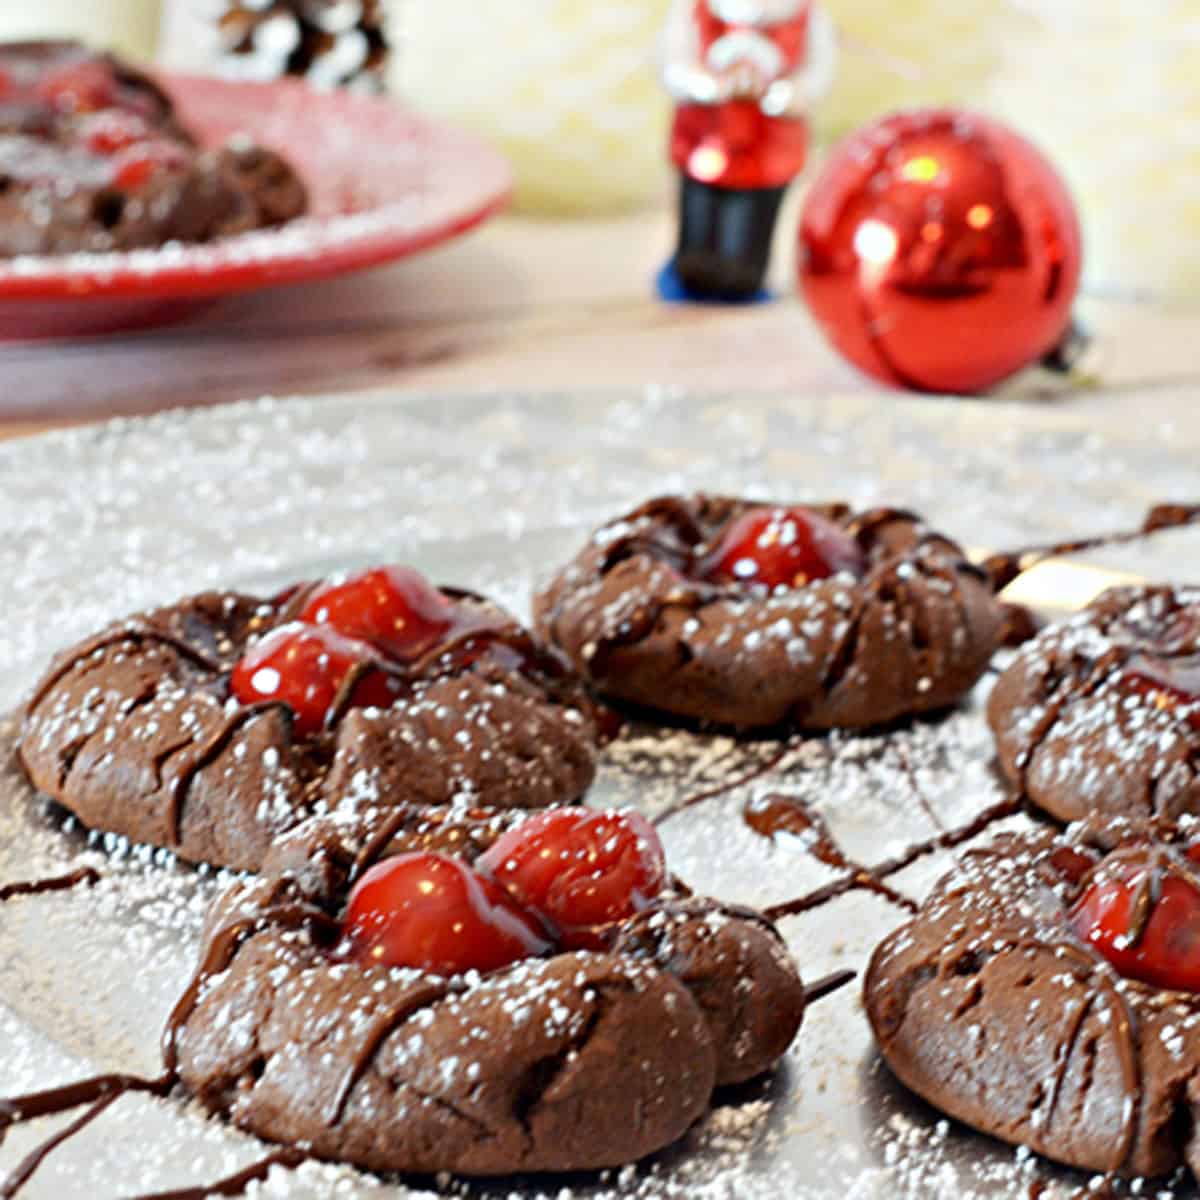 A group of chocolate cookies topped with cherries.